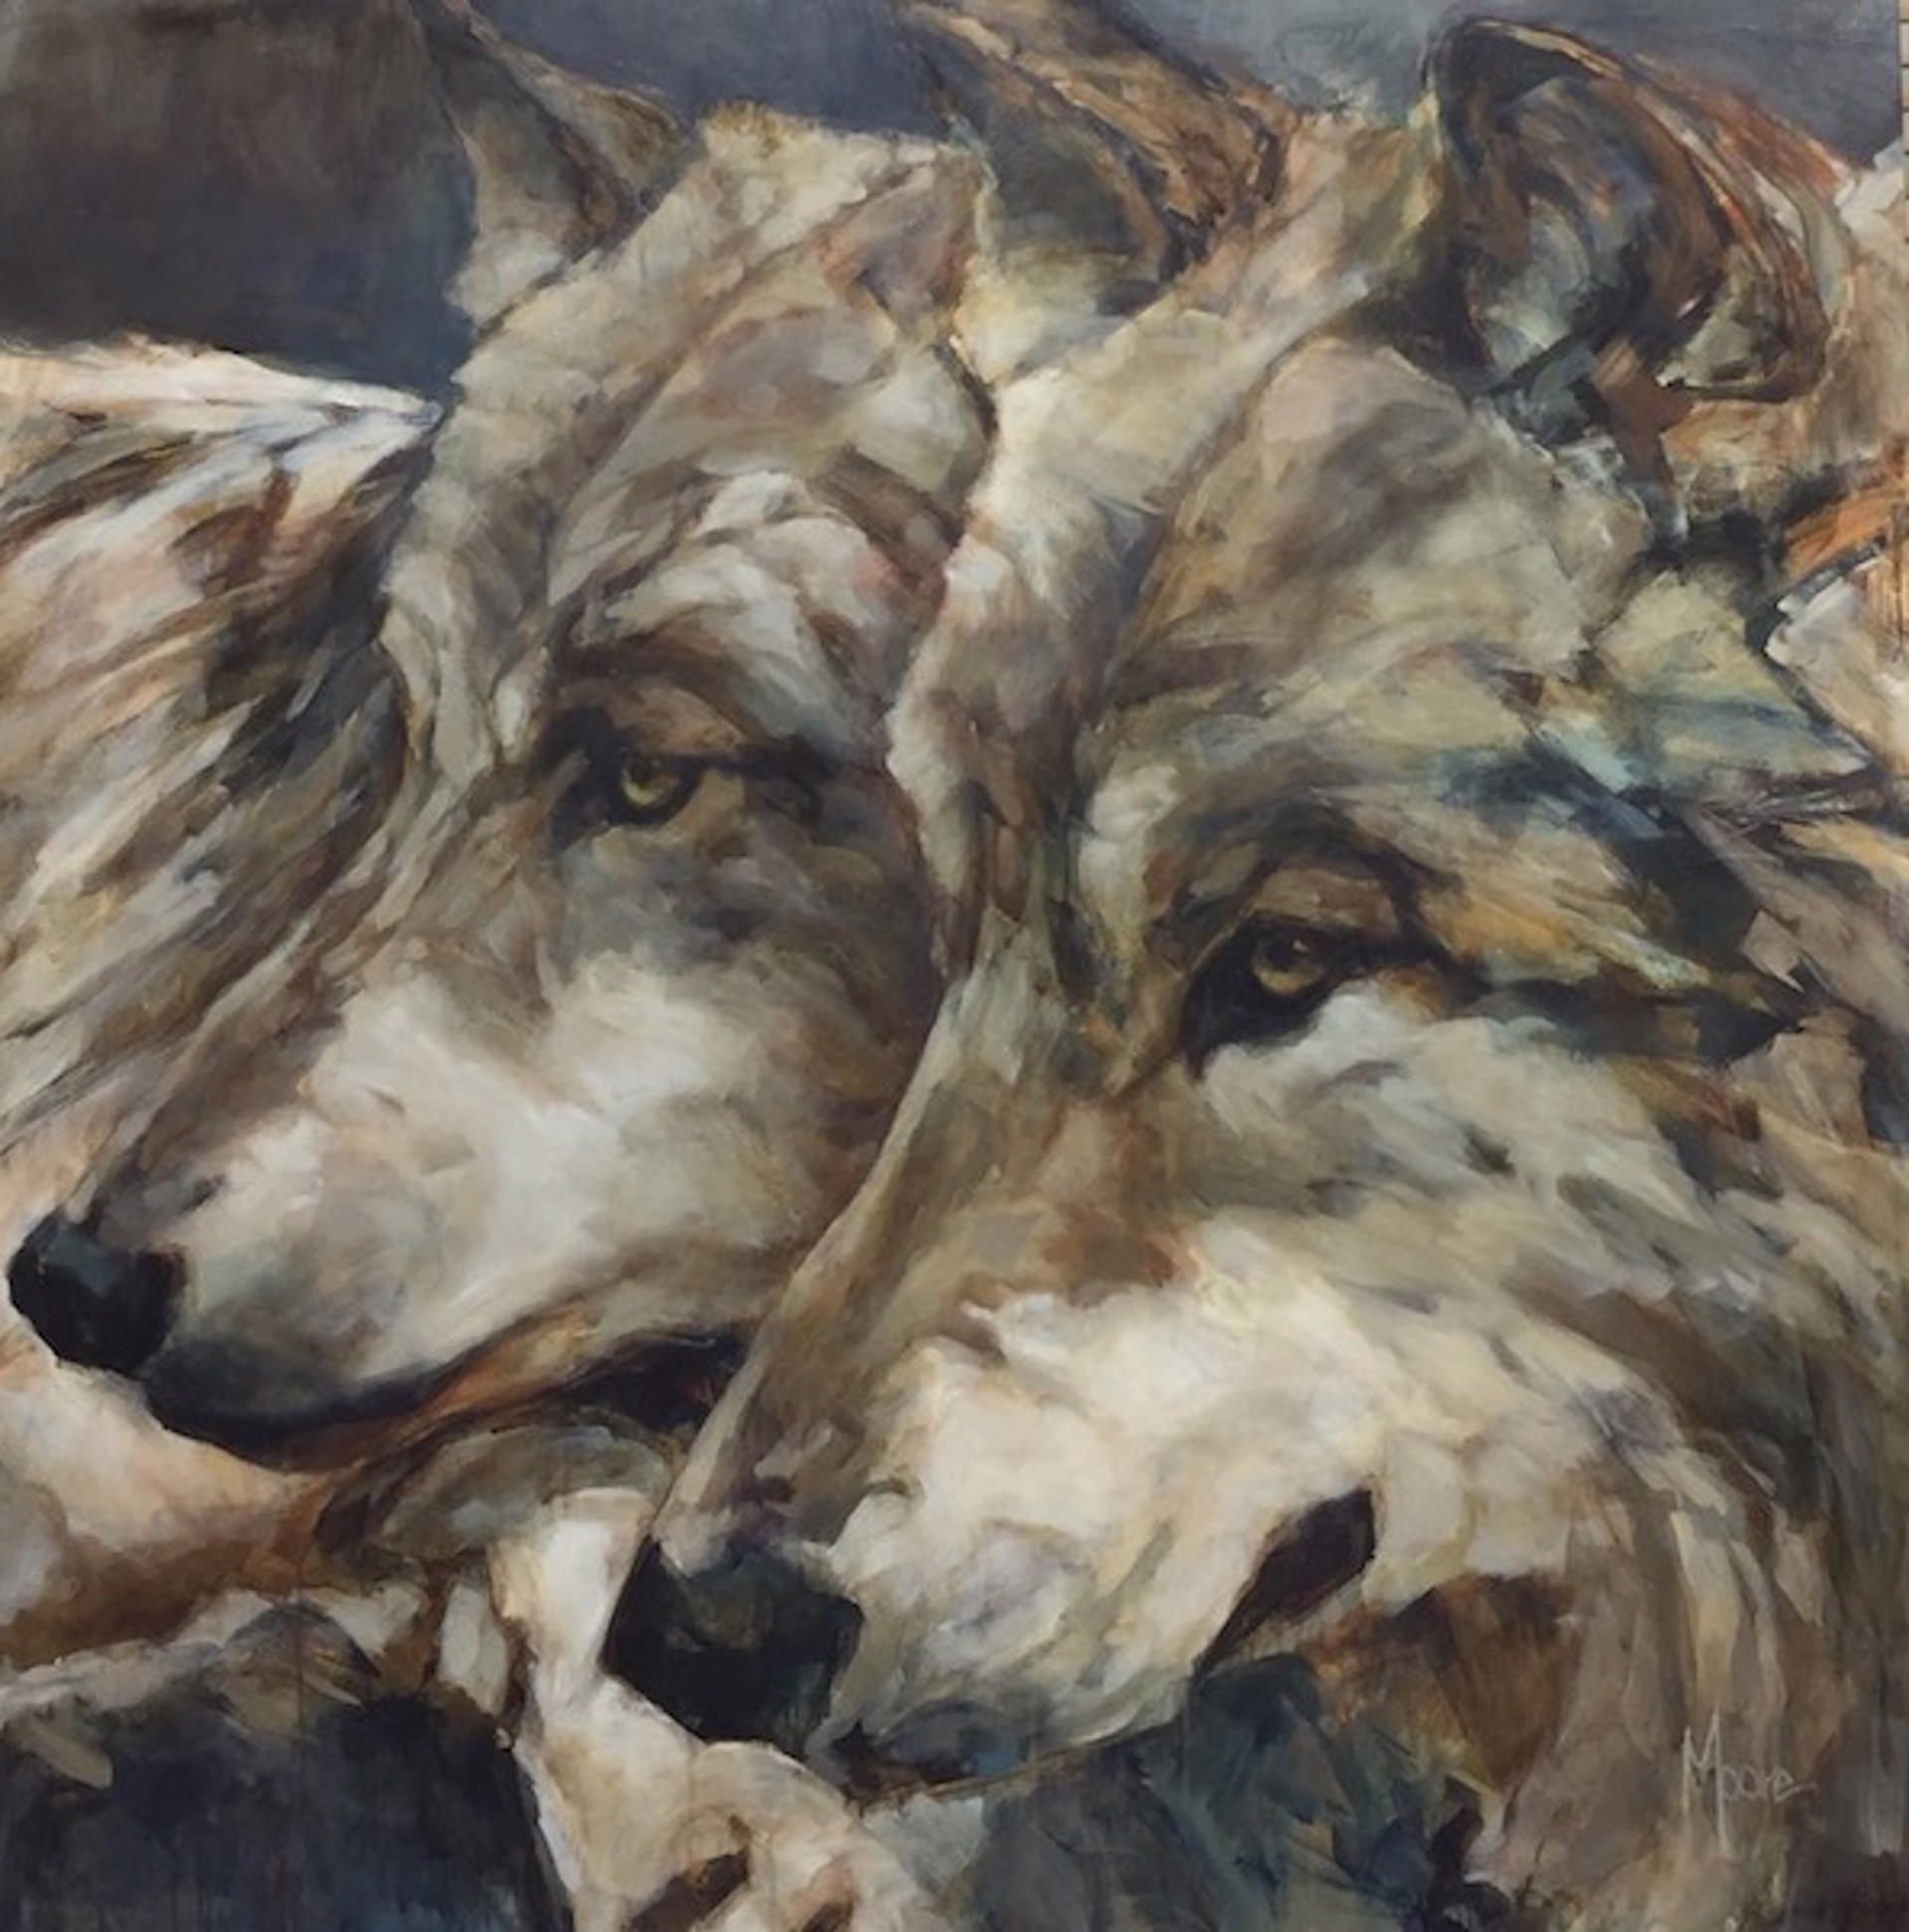 Family Ties - two wolves by Andrea Moore